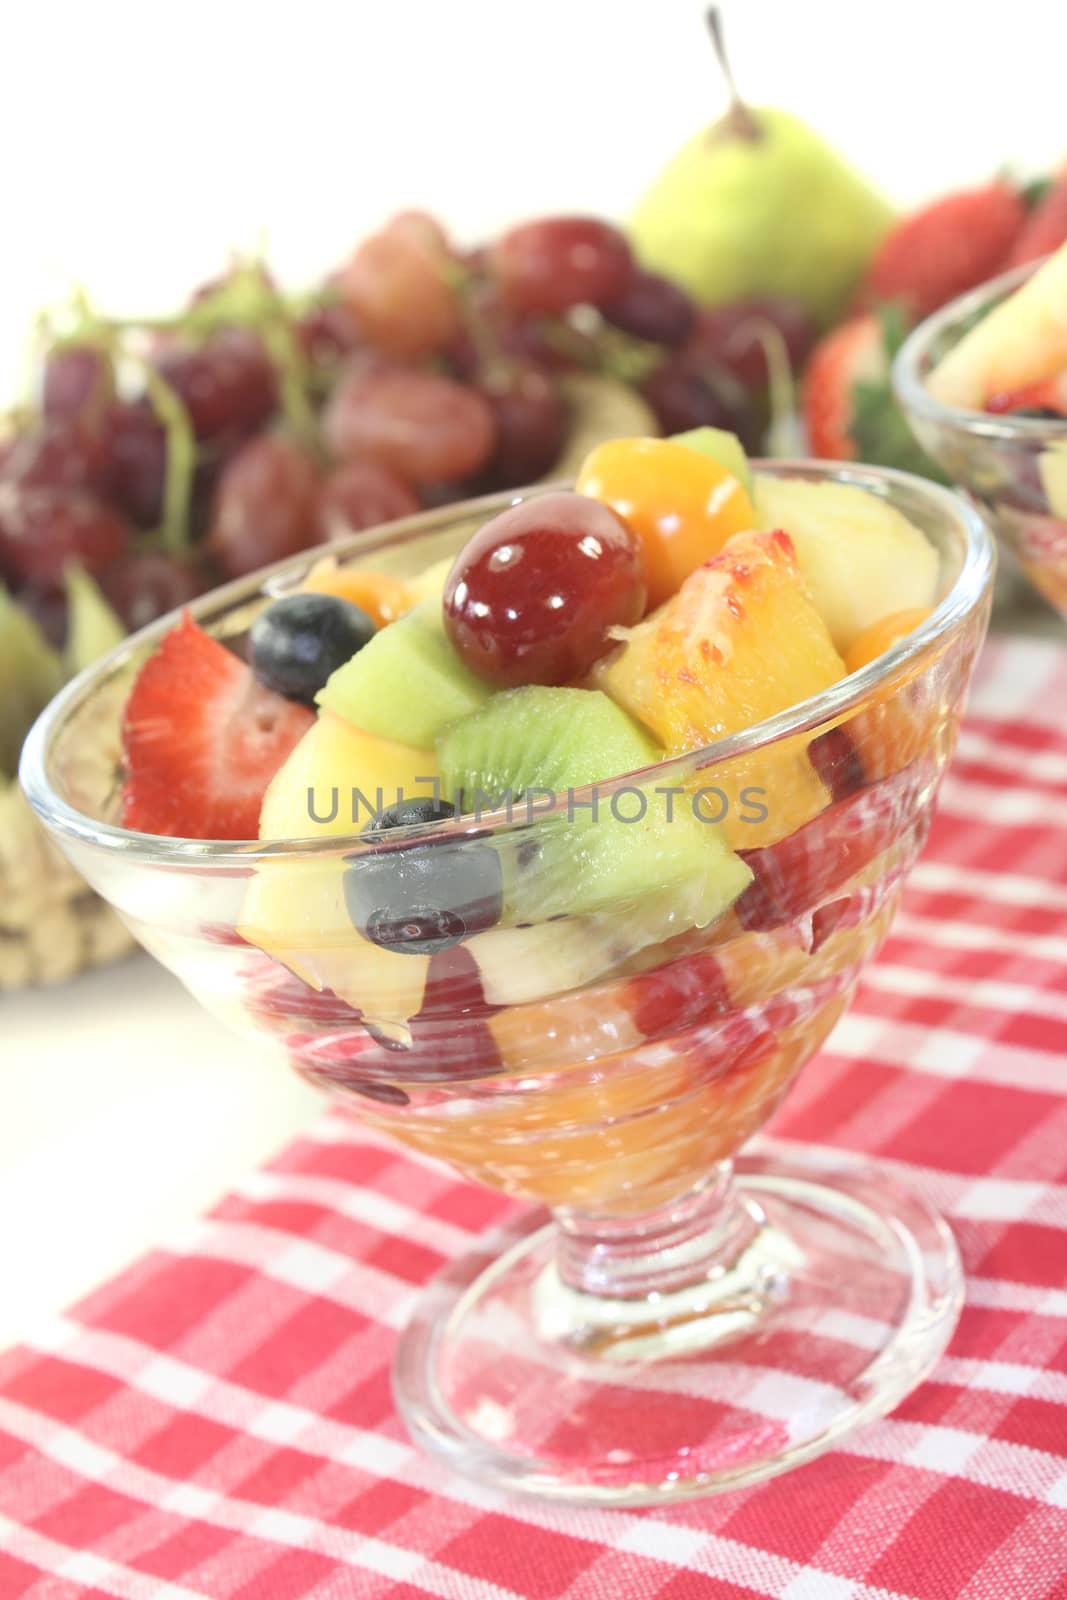 Fruit salad on a checkered napkin before light background